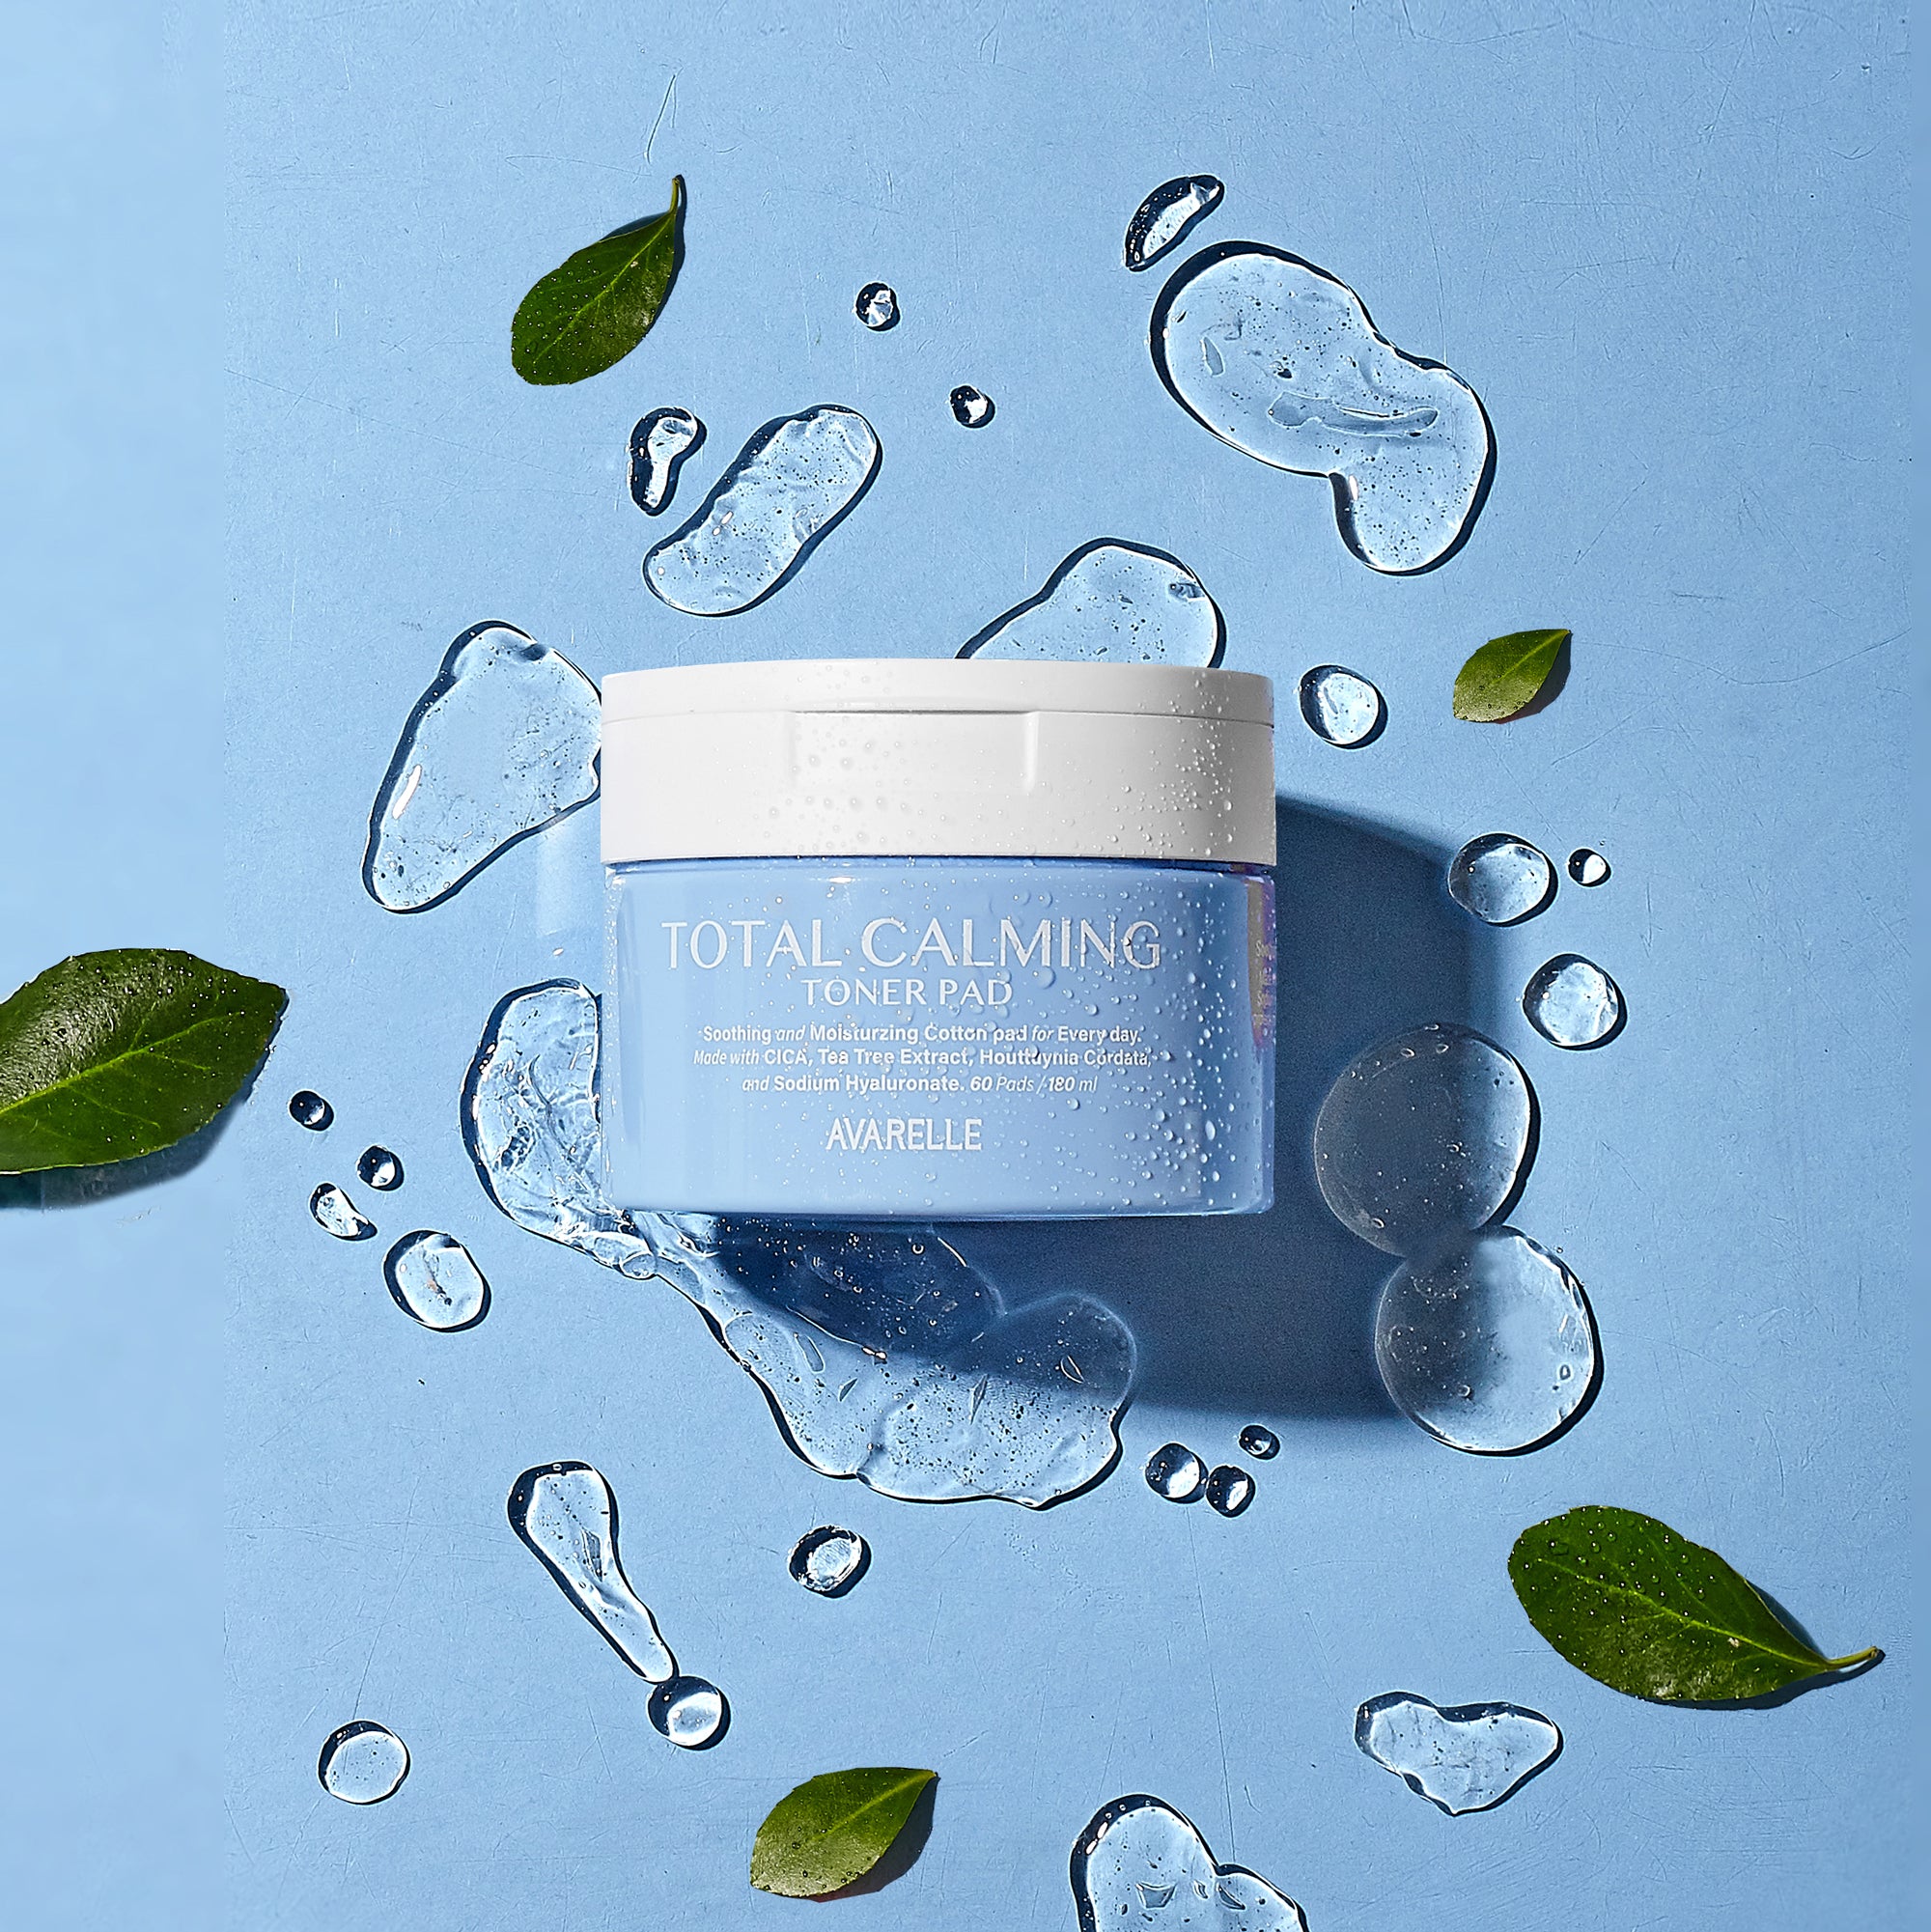 A Total Calming Toner Pads from Avarelle featuring AHA & PHA surrounded by fresh green leaves and water droplets on a blue background.